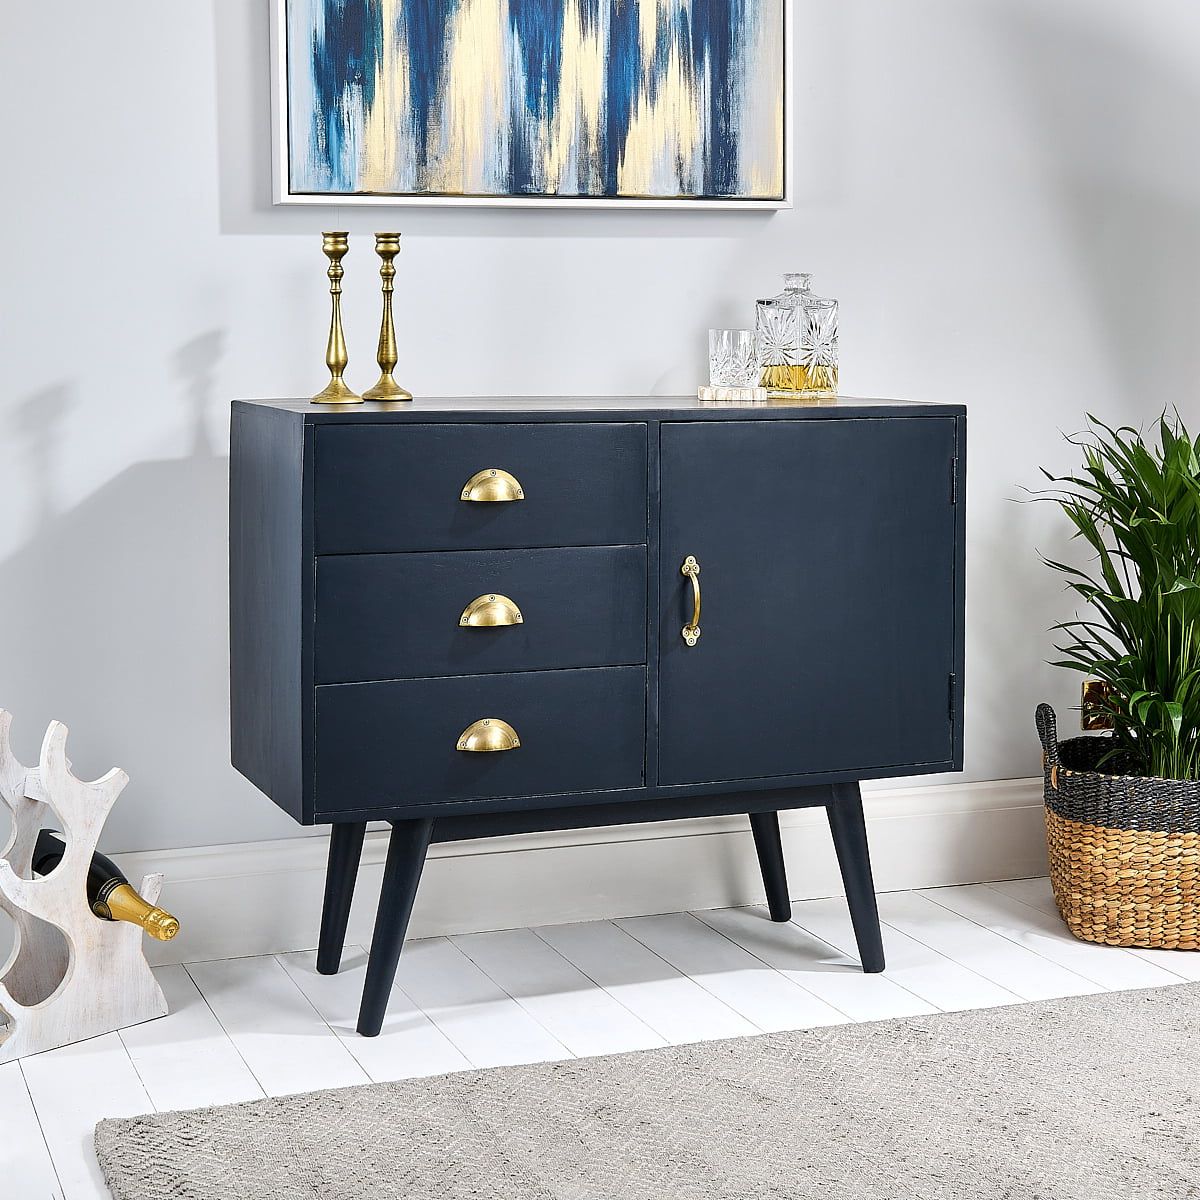 Antique Blue Sideboard Navy – Ellie – Zaza Homes With Fashionable Navy Blue Sideboards (View 3 of 10)